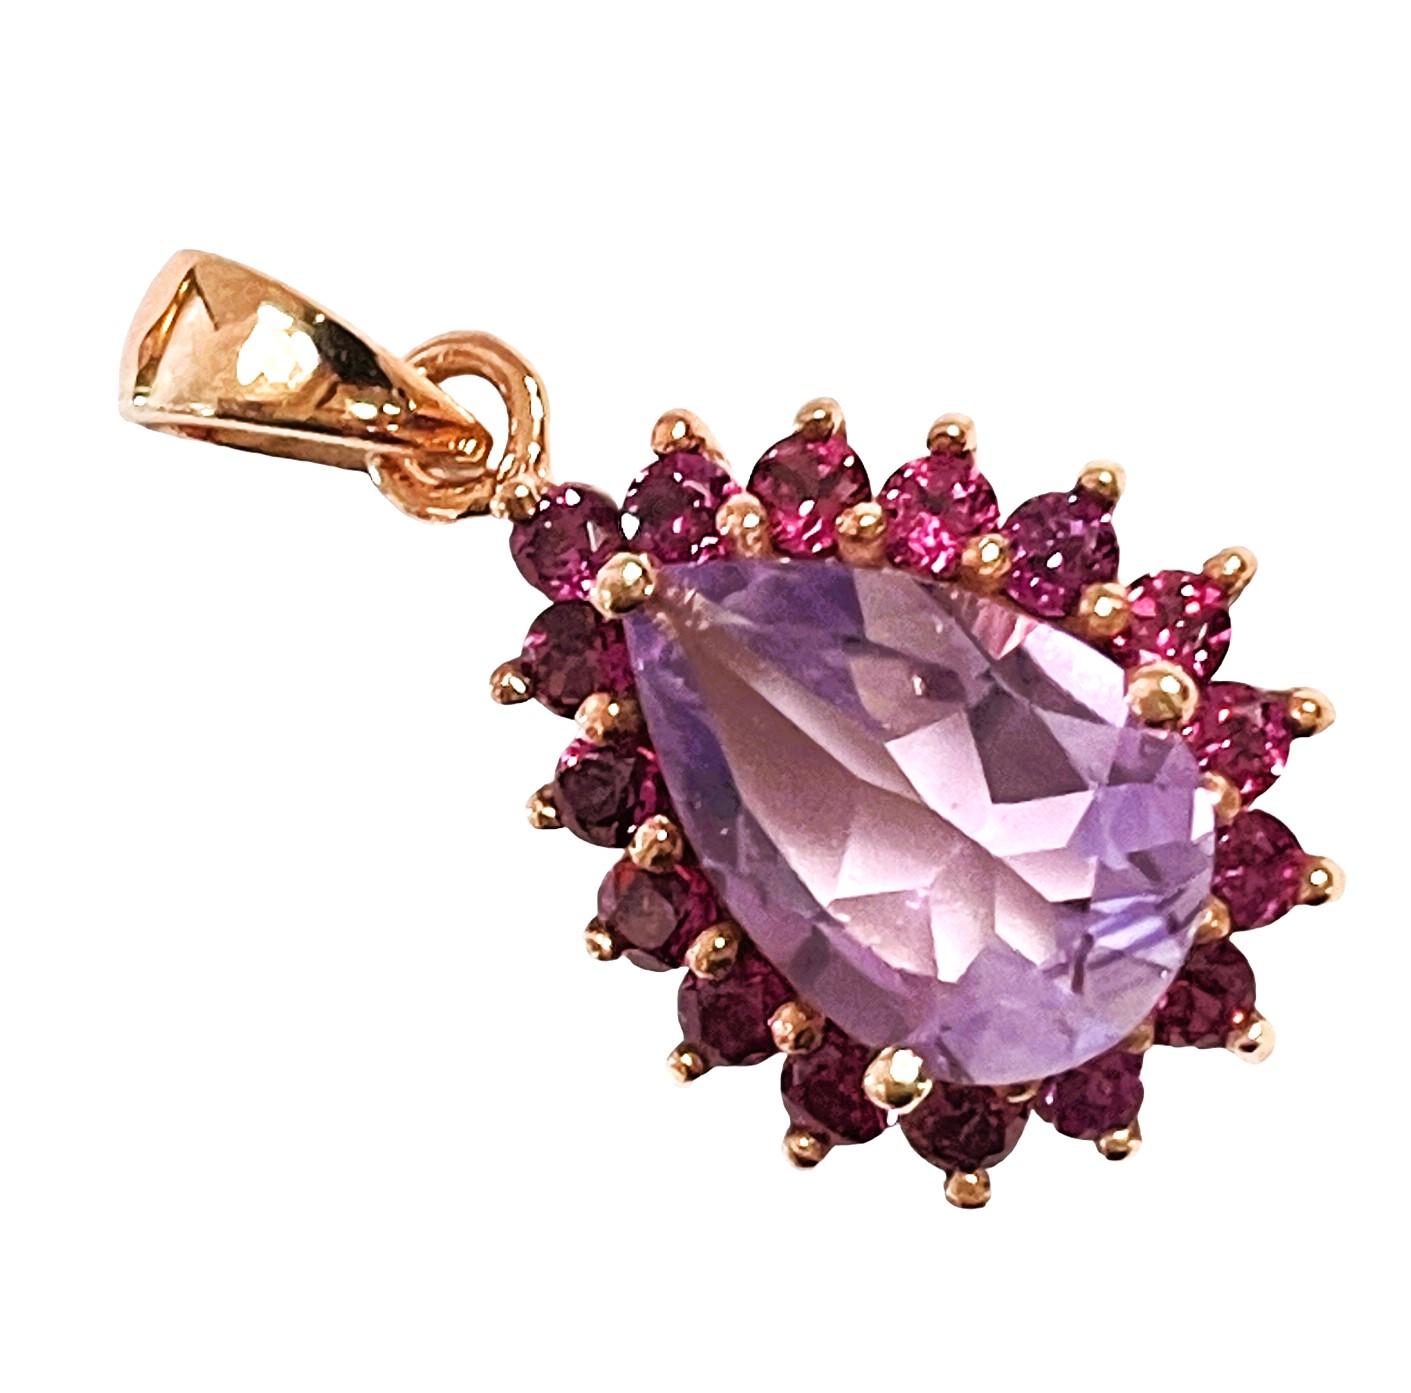 This pendant is just so beautiful!   It is a pear cut stone and is 3.2 Ct   The main stone is 11 x 9 mm and is surrounded by diamond cut Rhodolite Garnet stones. The pendant itself is 1 inch long and .5 inches wide.  The weight in Grams is 3.20.  I